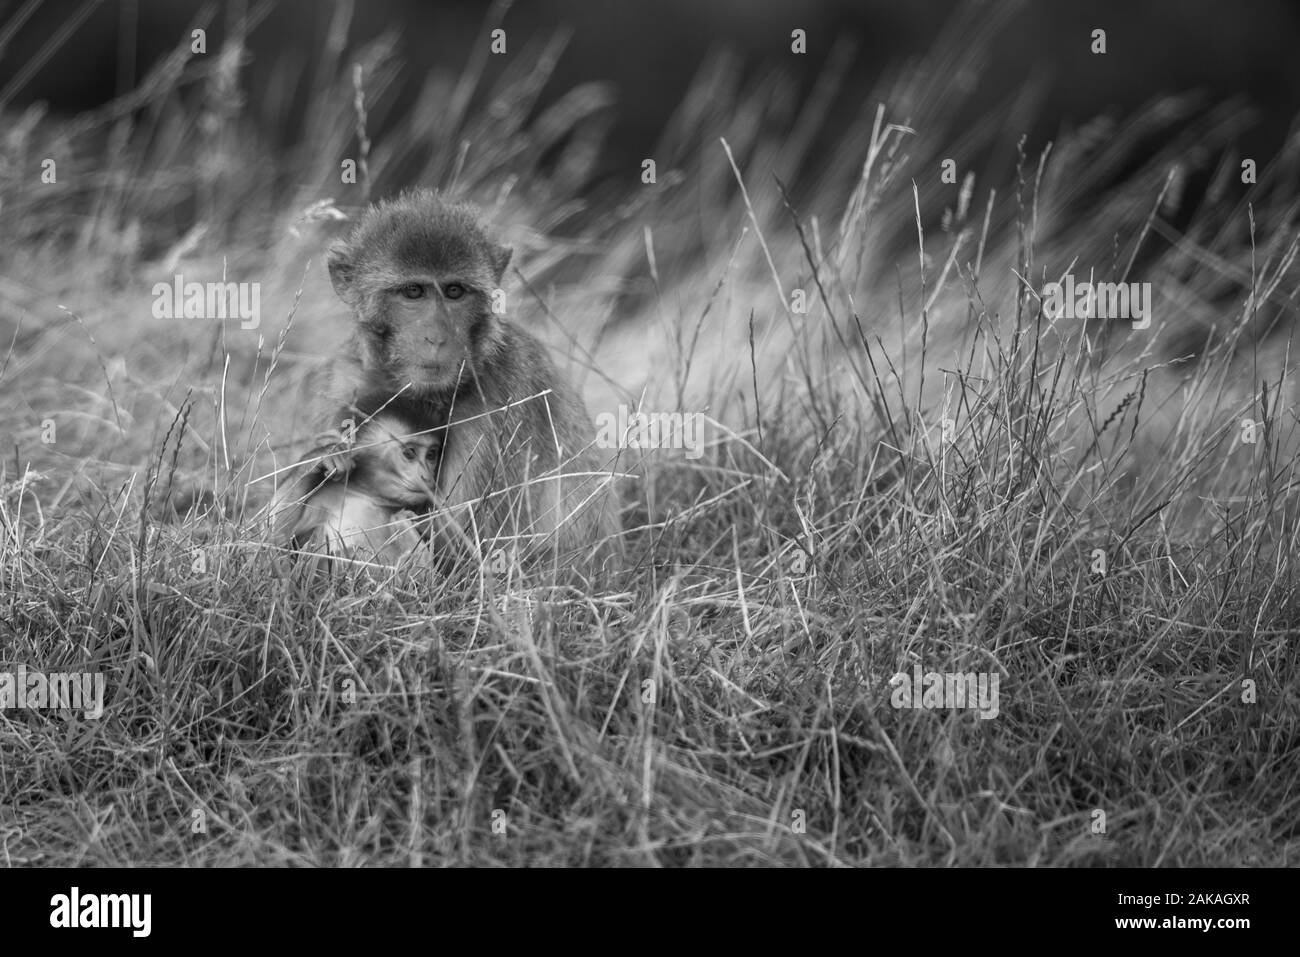 Rhesus Macaques up to a variet of mischeif in the grass Stock Photo